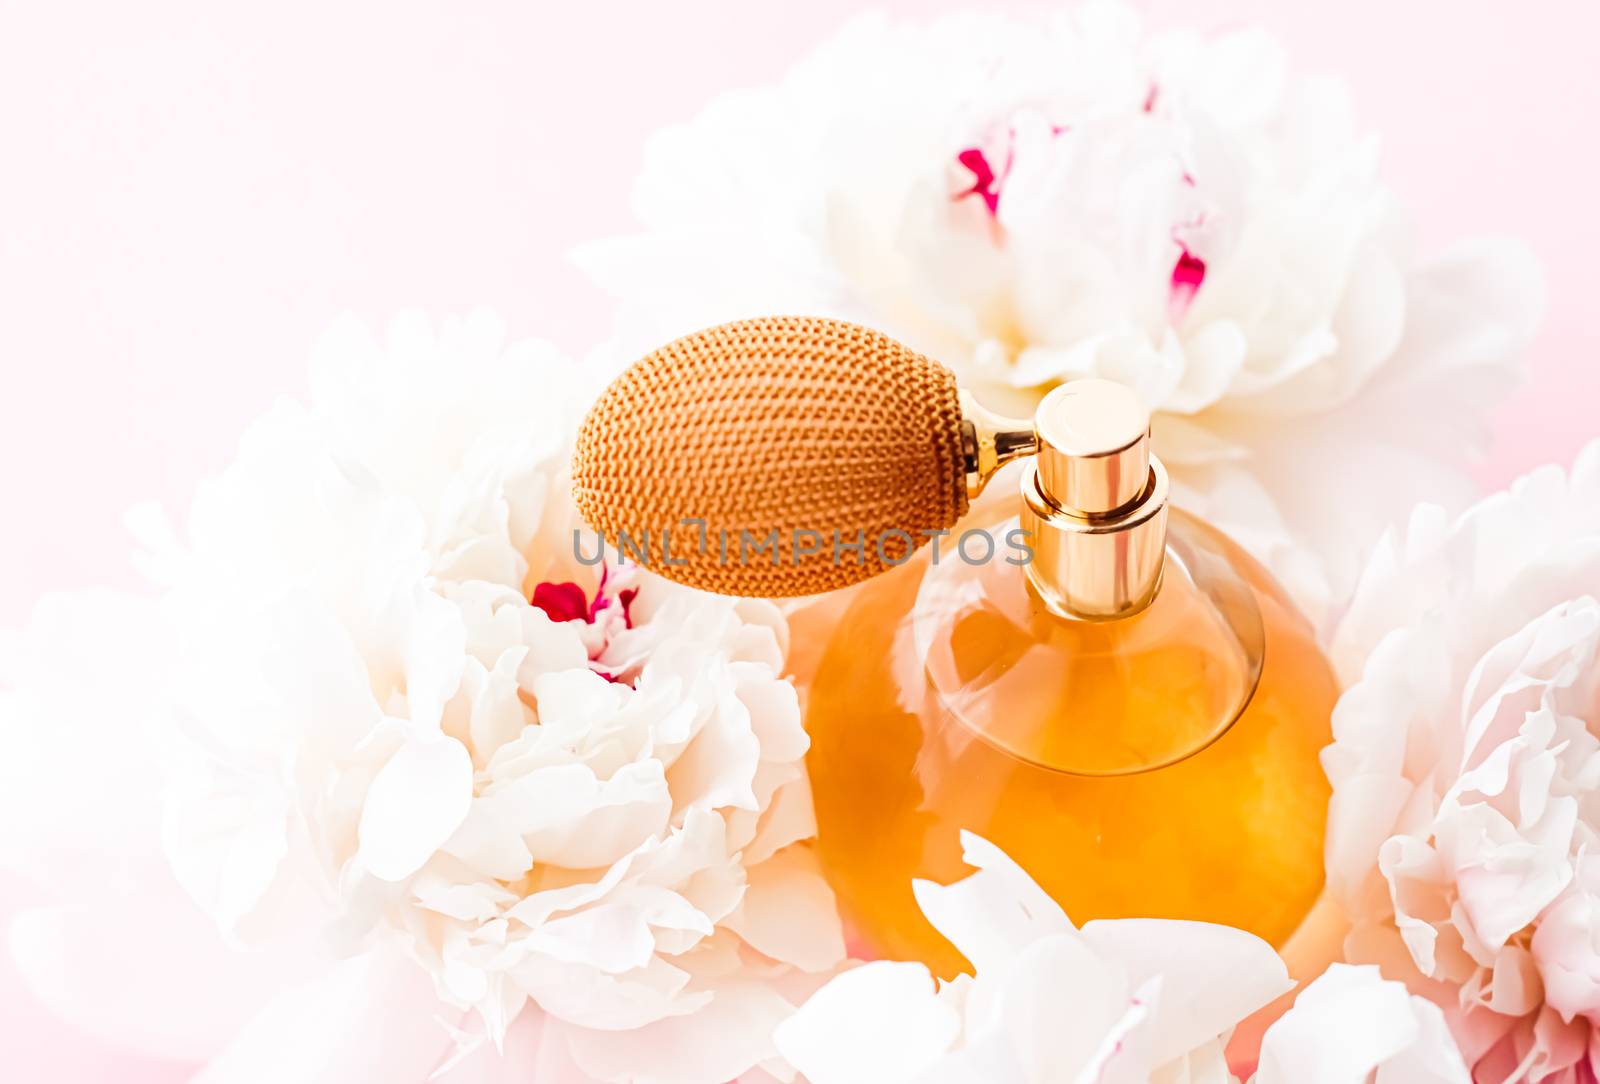 Chic fragrance bottle as citrus perfume product on background of peony flowers, parfum ad and beauty branding design